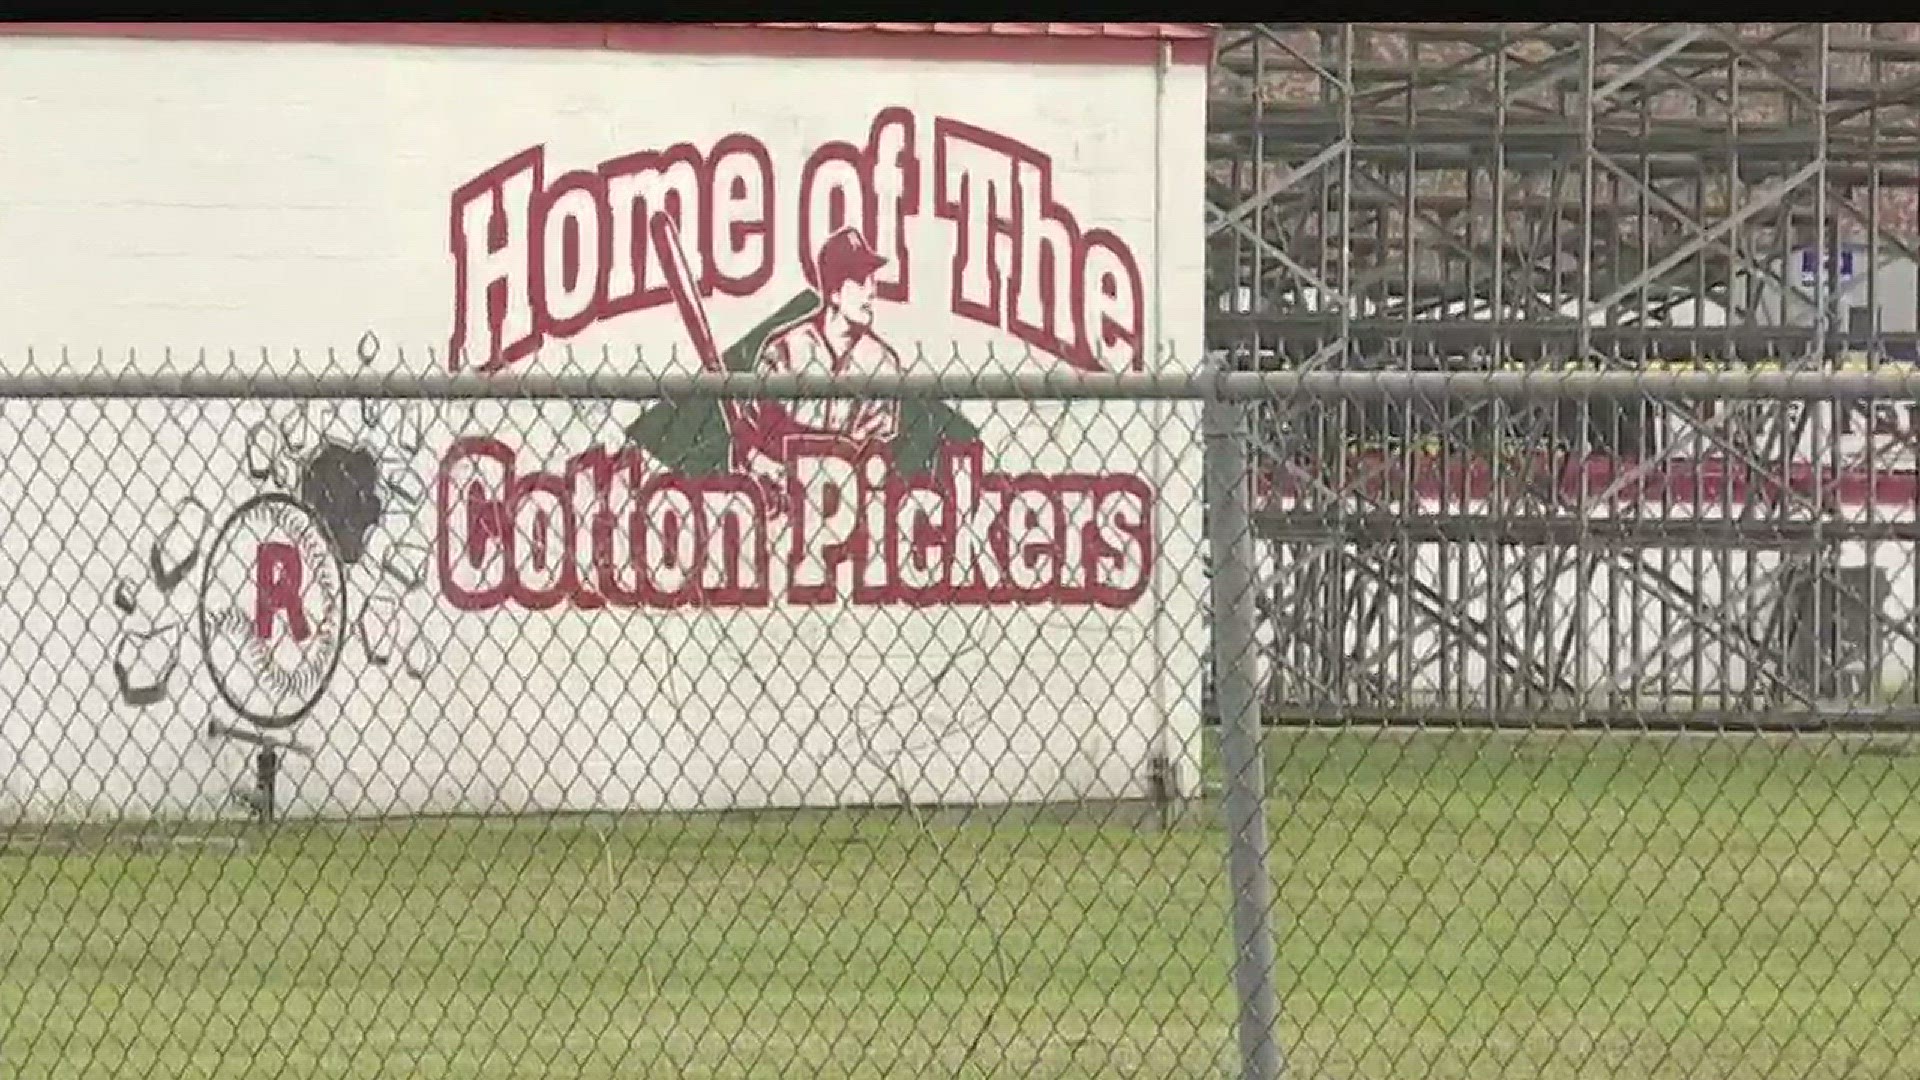 For decades the Hamlin Middle School mascot has been a rebel wearing a confederate uniform, but the school decided to change it due to what some feel is an offensive past.